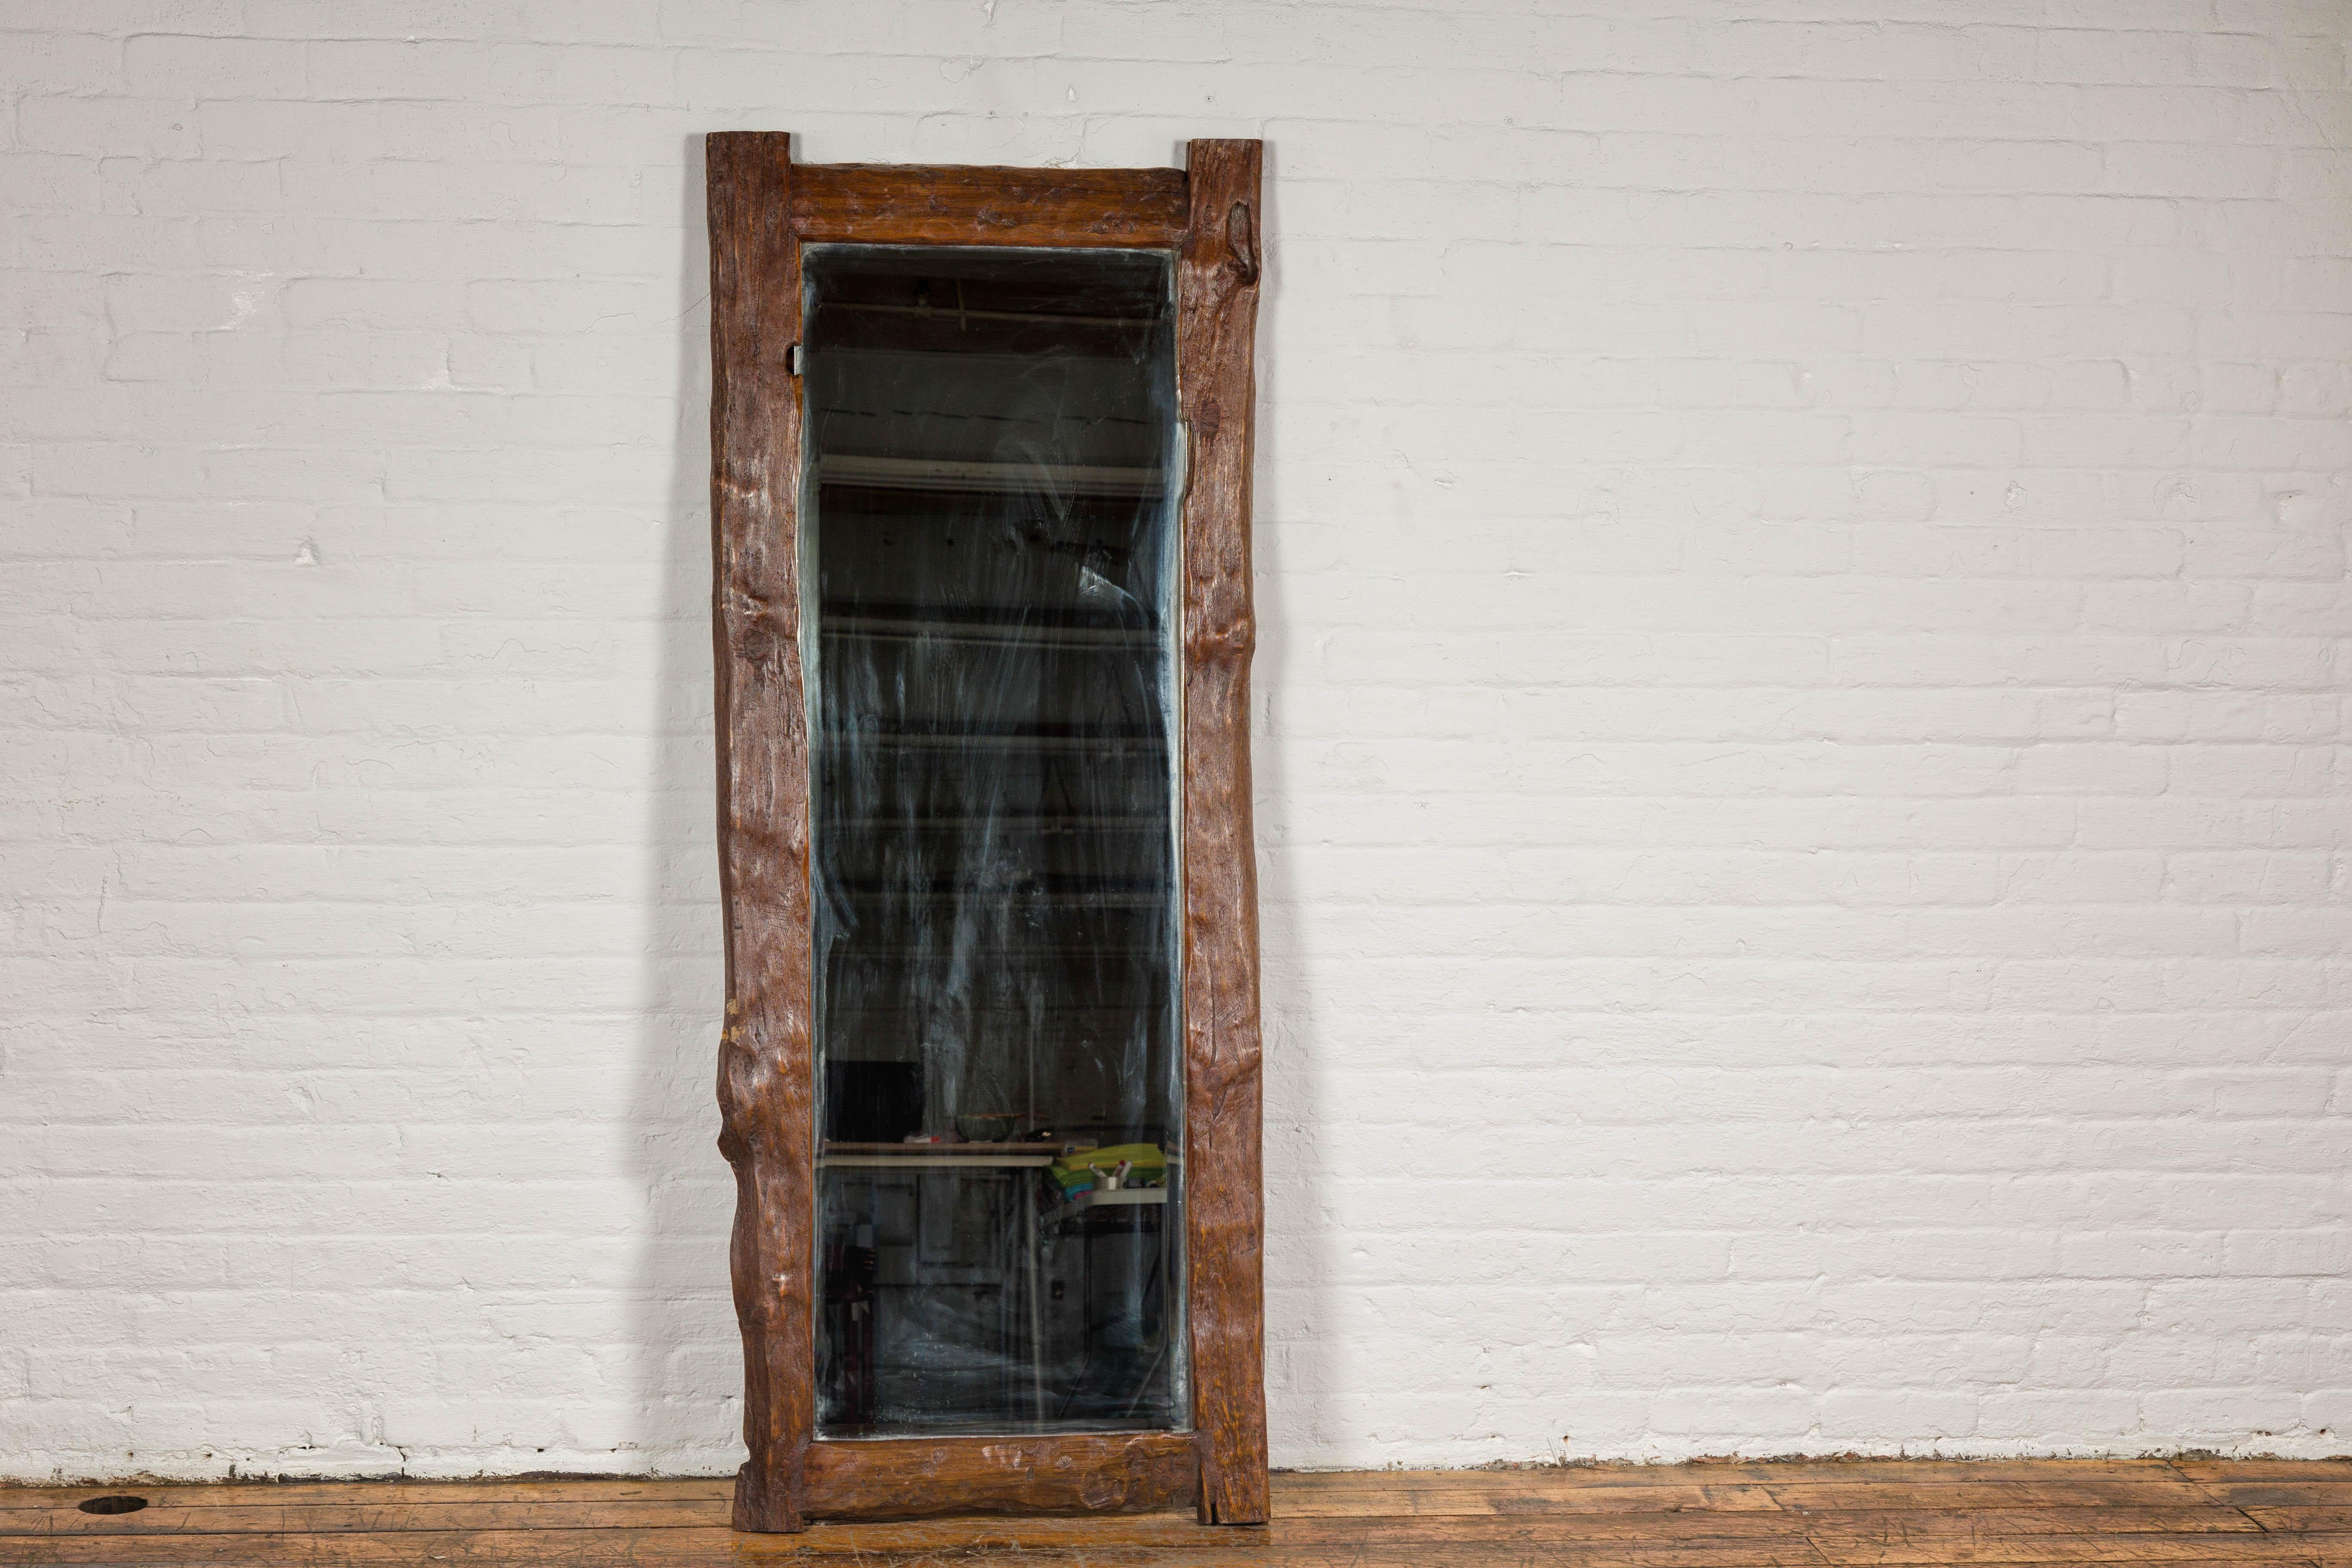 Country style antique driftwood made into a mirror with rustic character and beveled glass. This Country-style antique mirror is exquisitely framed in naturally weathered driftwood, offering a touch of rustic elegance to any interior space. The